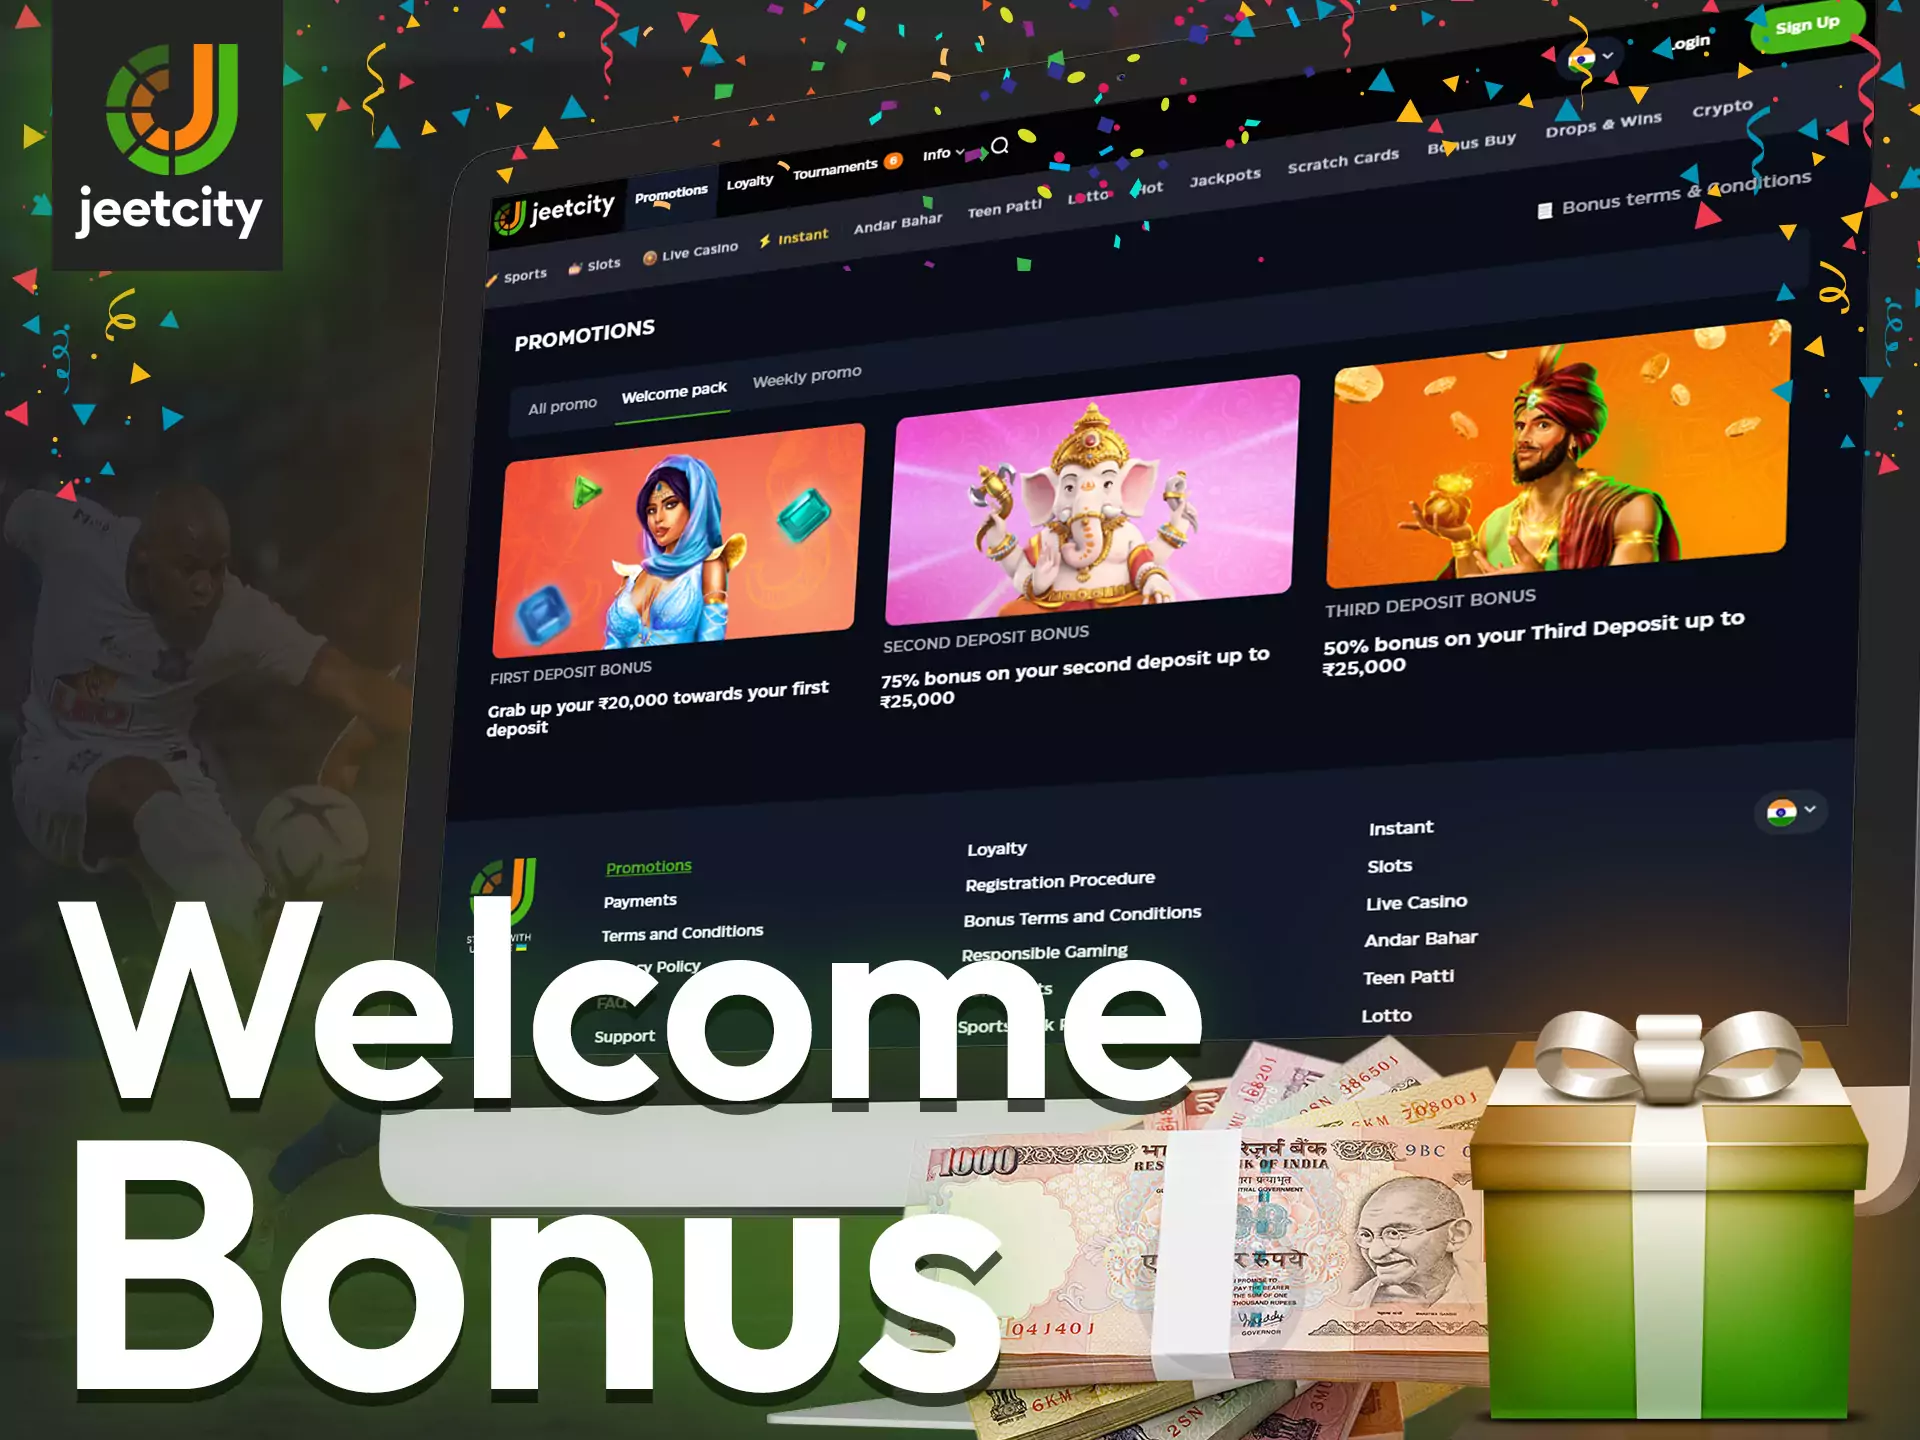 Get a special welcome bonus from JeetCity and play with the benefits.